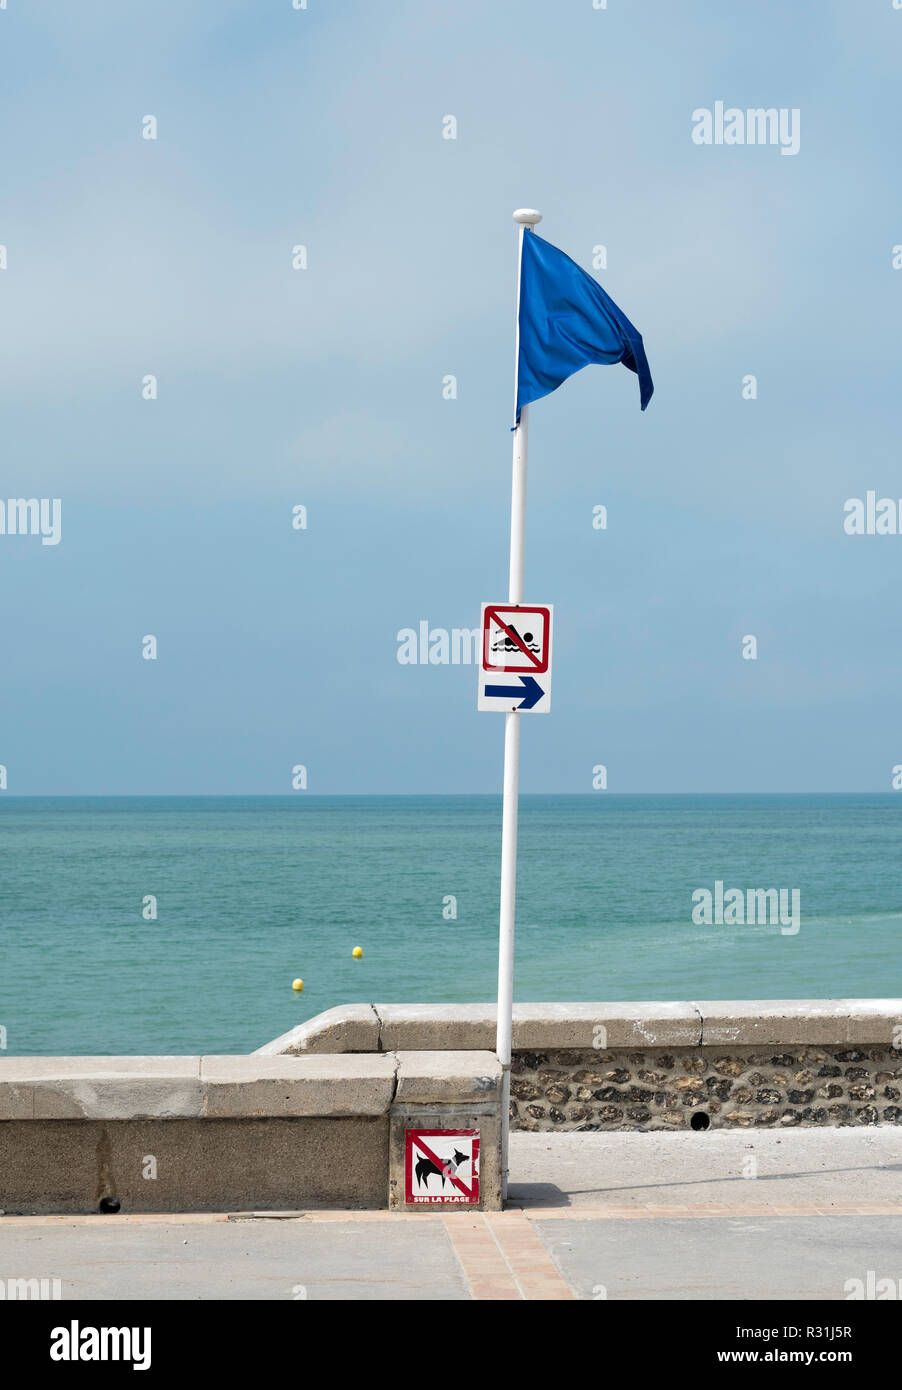 Blue flag indicating the limit of the safe bathing zone in the sea at Hautot-sur-Mer,  Seine-Maritime,  Normandy, France, Europe Stock Photo